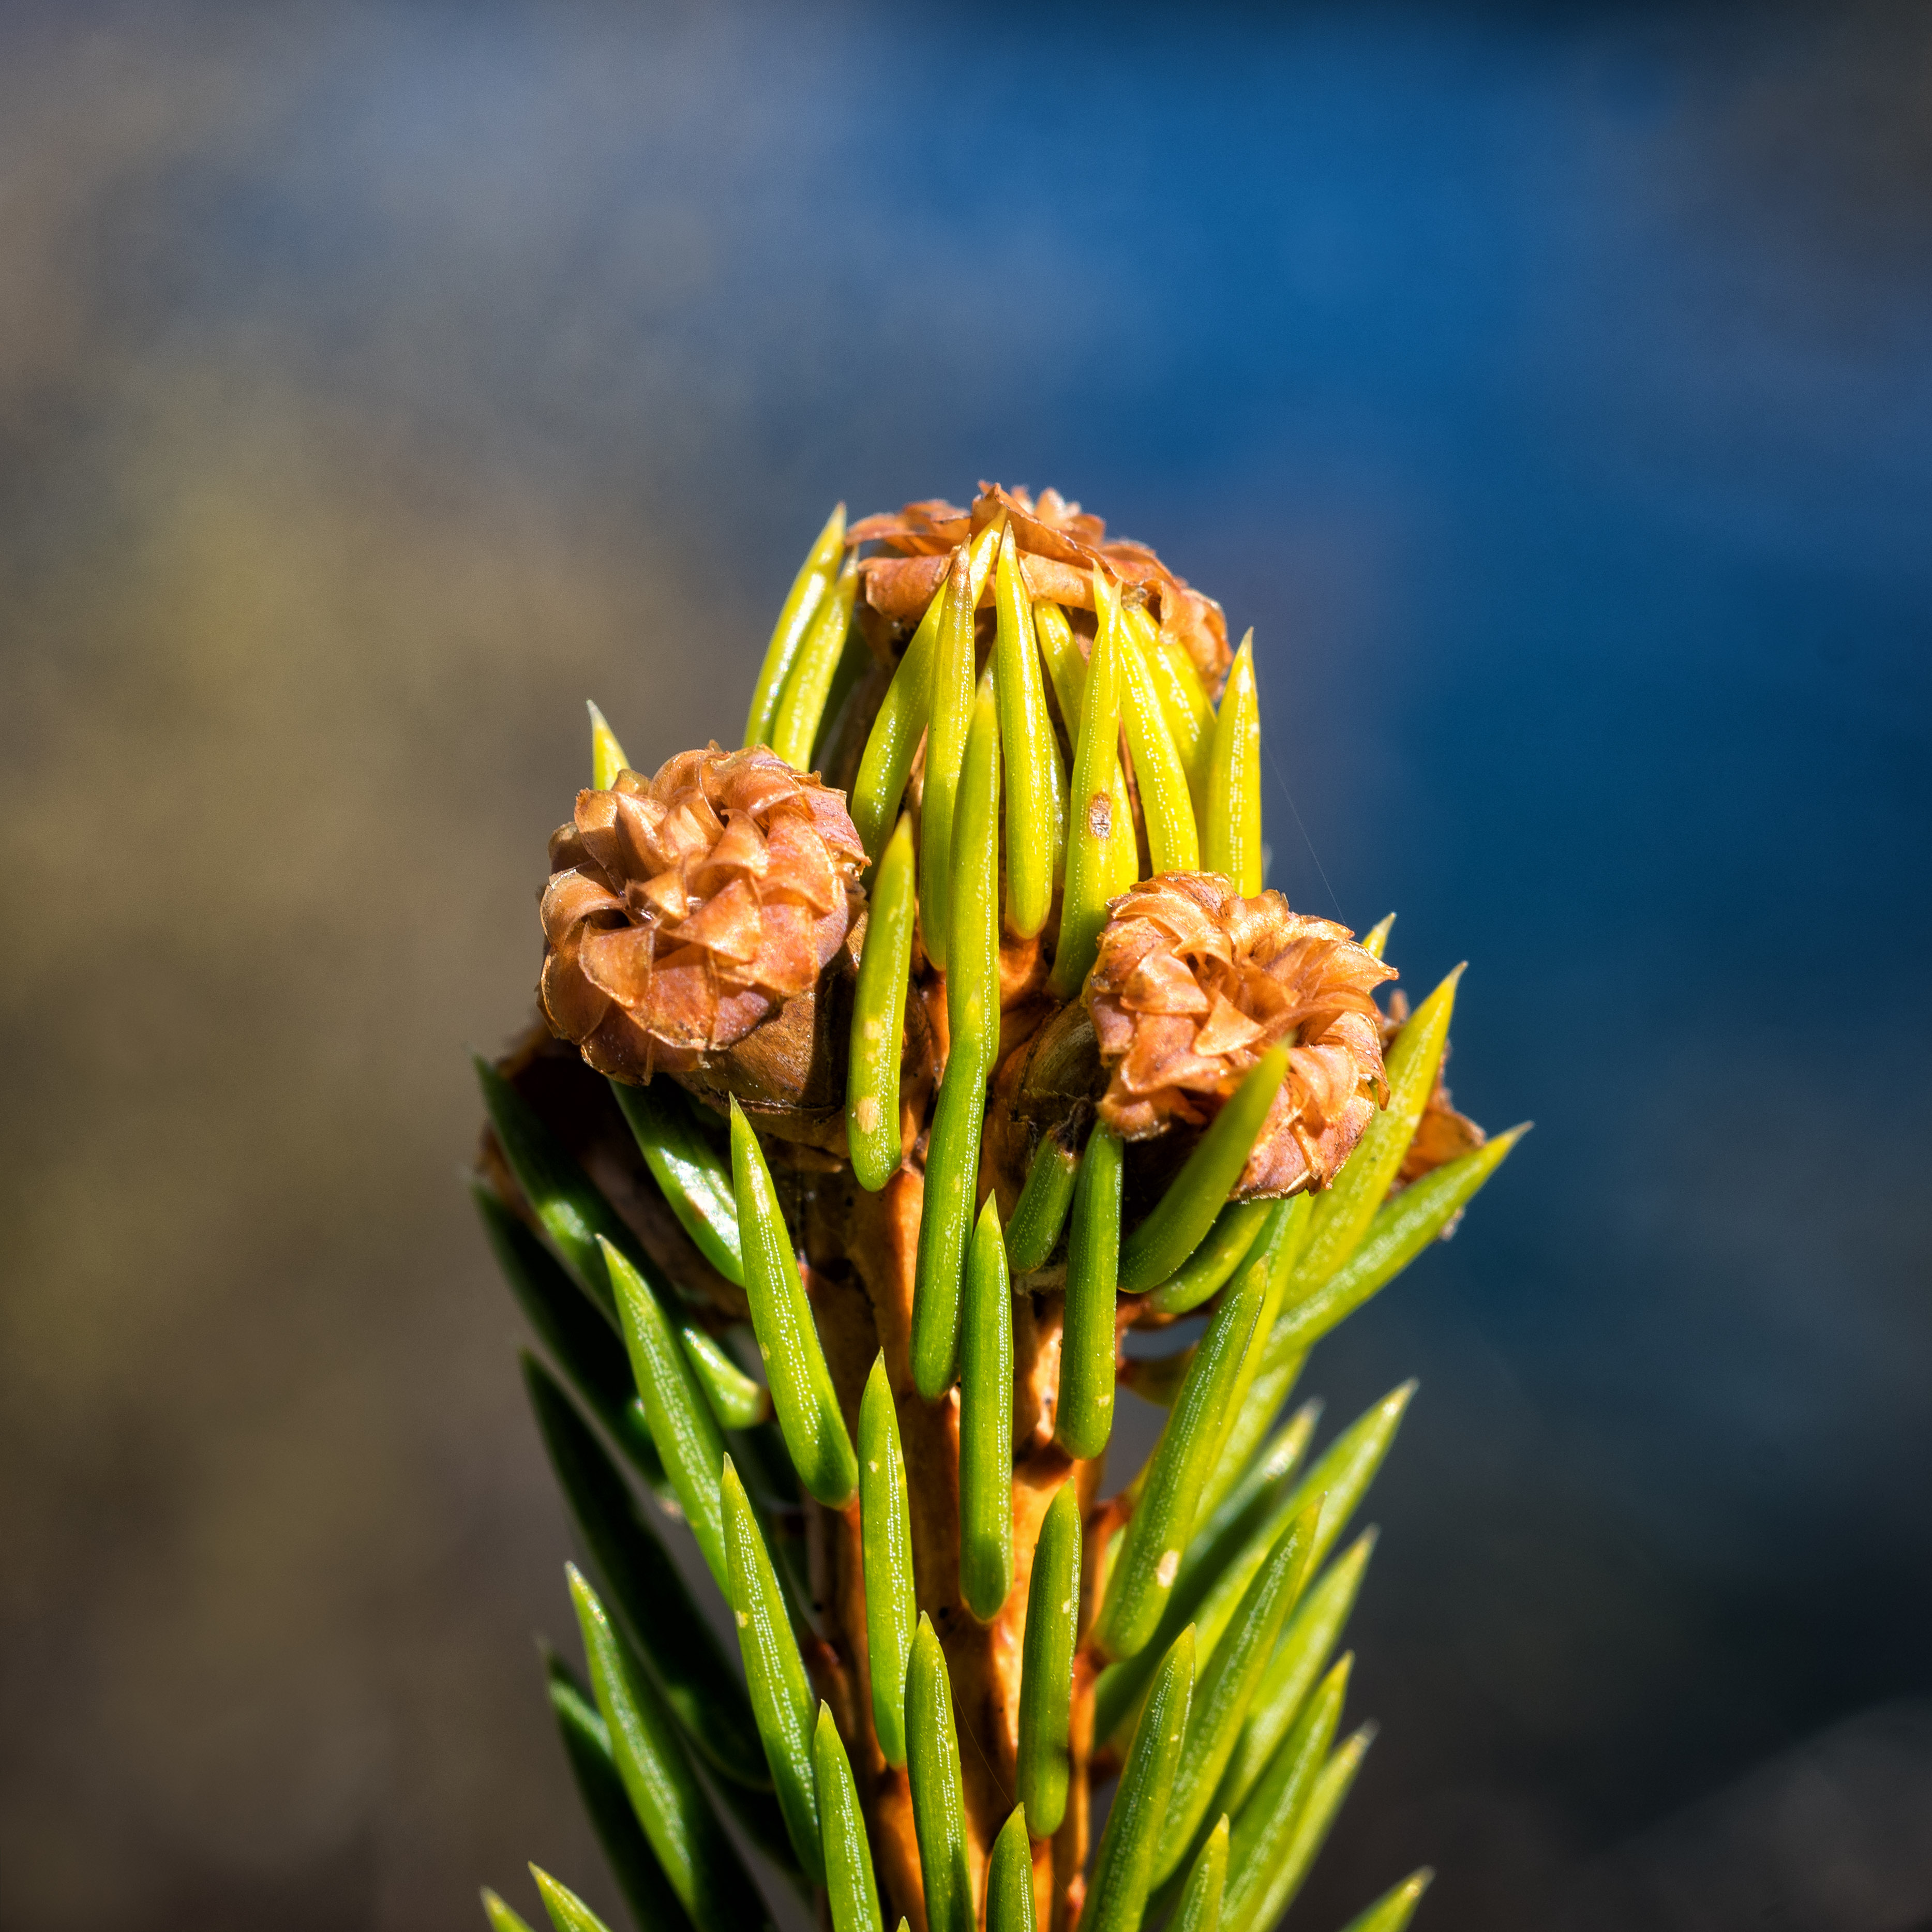 Picea abies shoot with buds, Sogndal, Norway